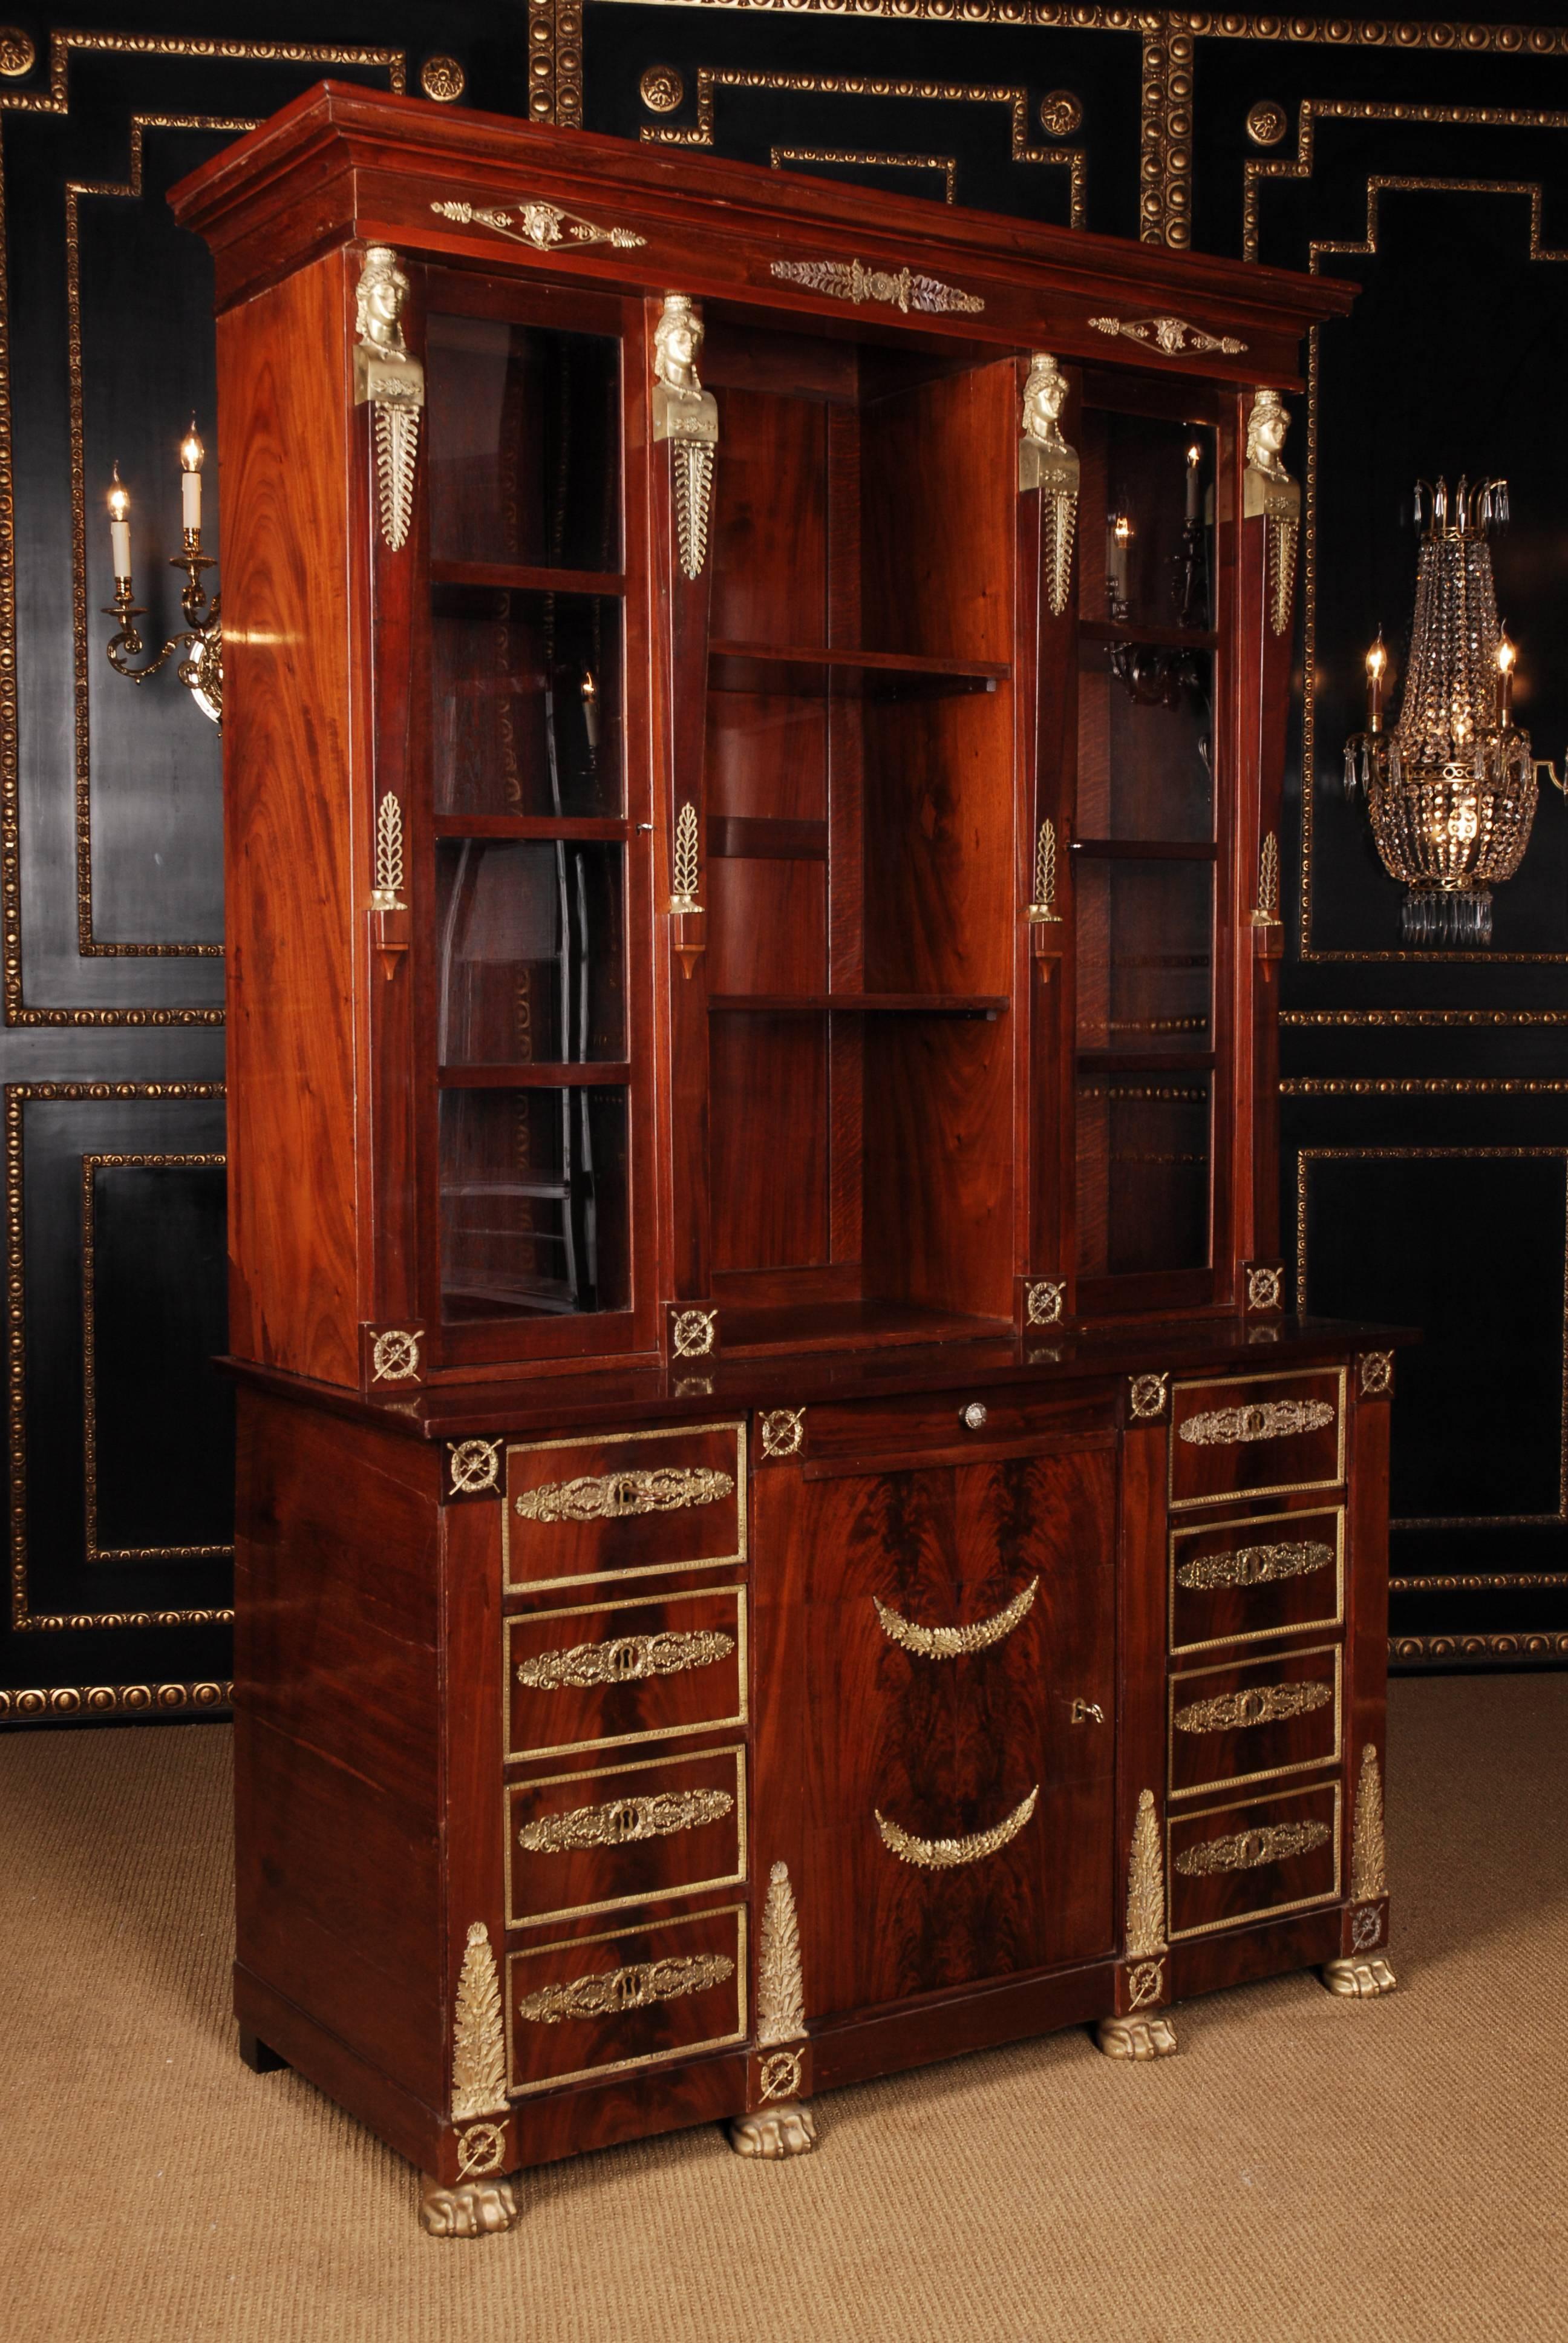 Cuba mahogany on solid oakwood. Partially fire-gilded bronze fittings. Foundation base on bronze paw feet. High-rise, architecturally designed corpus. In the front center door flanked by drawers and glare door. Slightly protruding top plate,